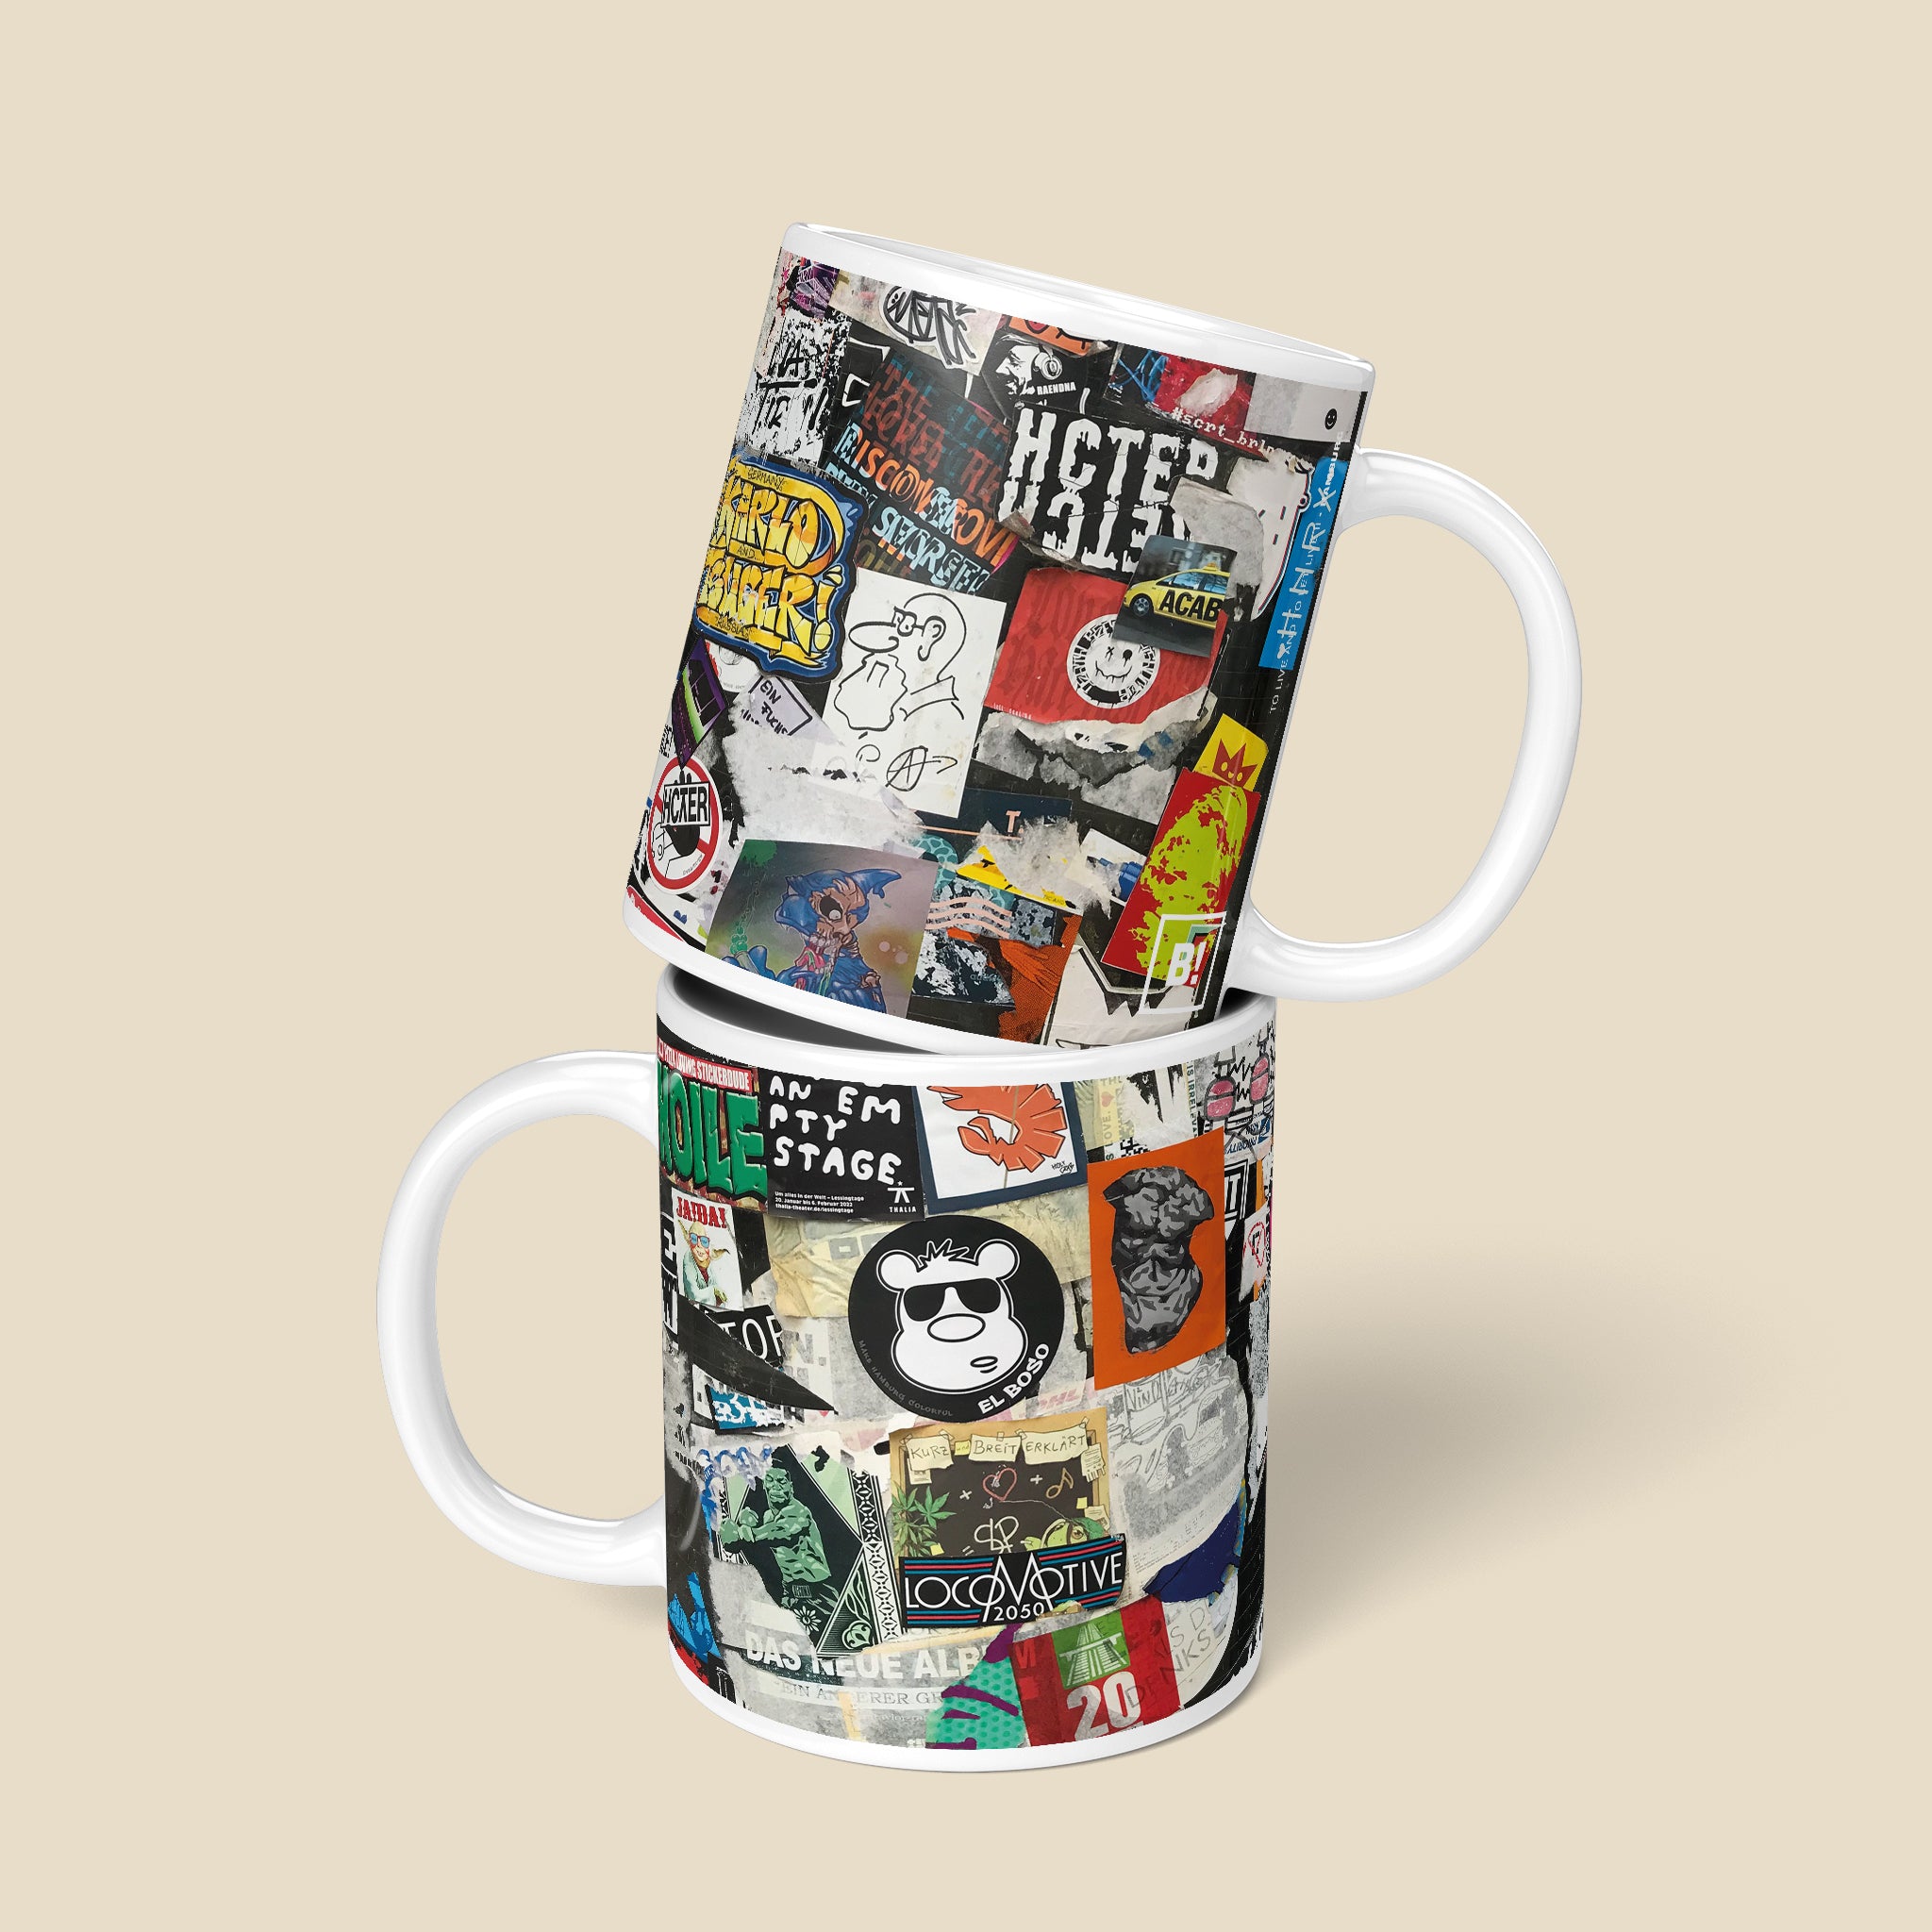 Be inspired by our Urban Art Coffee Mug – To Live And Let Live - No2 from Hamburg. Featuring a front and back view of the 11oz mug. The urban billboard design lends an authentic urban feel to the mug, making it resemble a piece of street art itself.